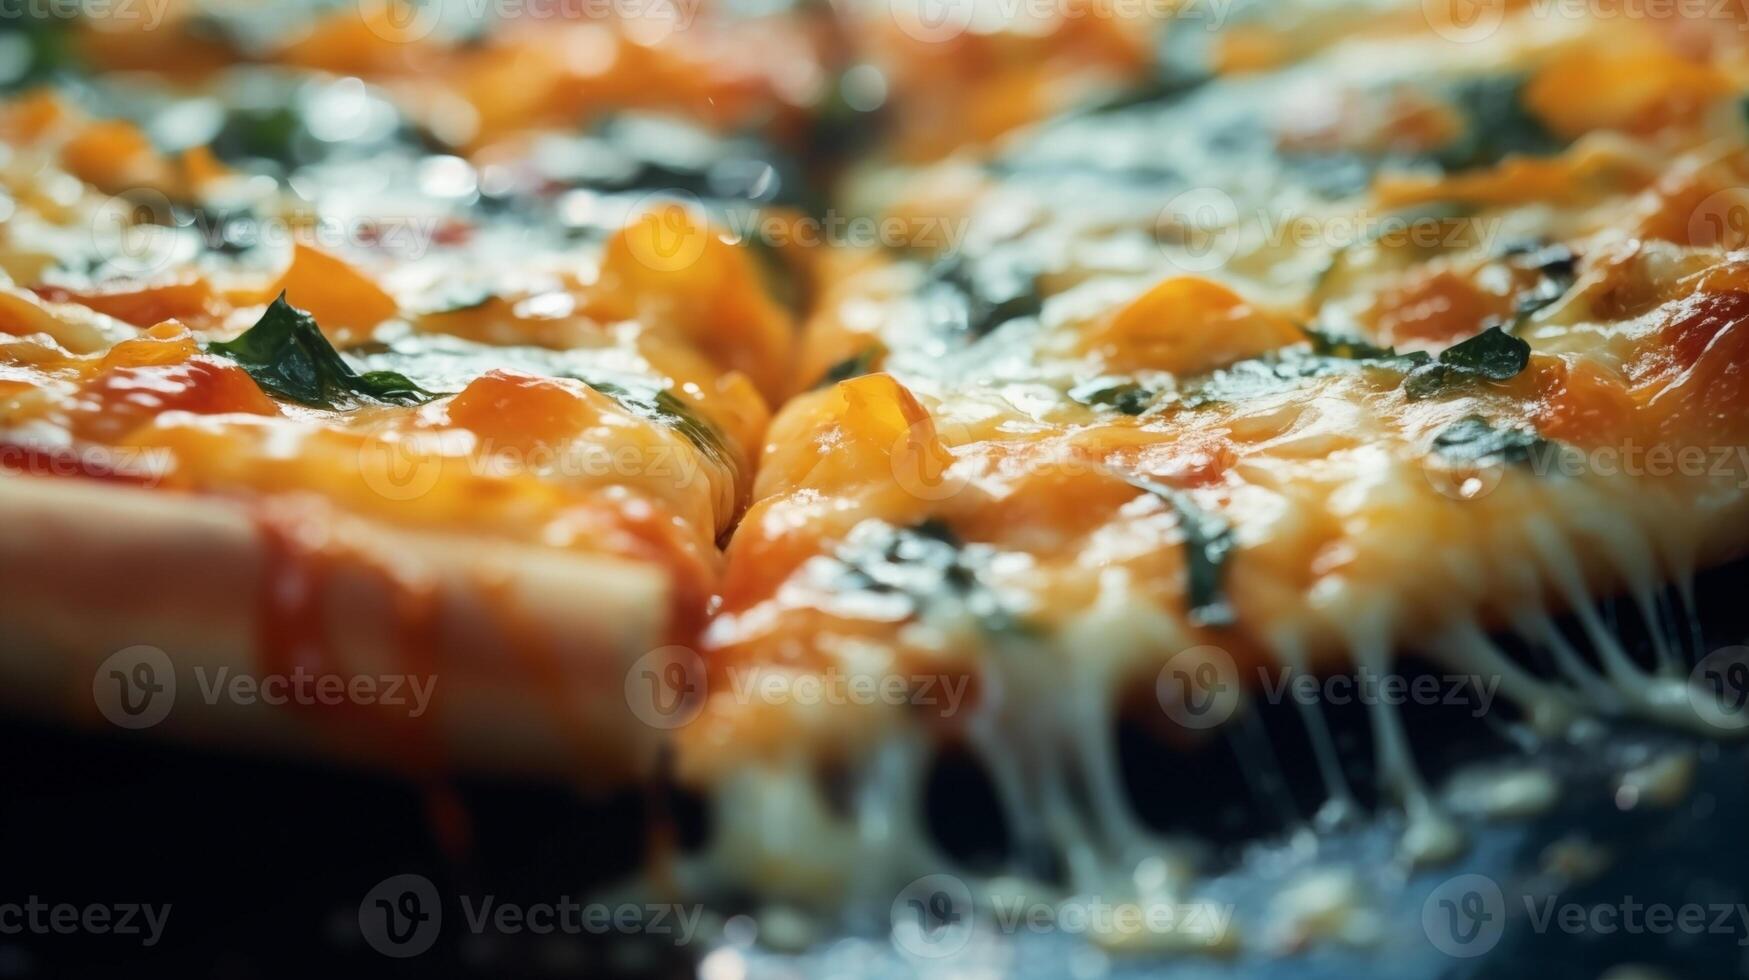 Extreme close-up of tasty pizza. Food photography photo